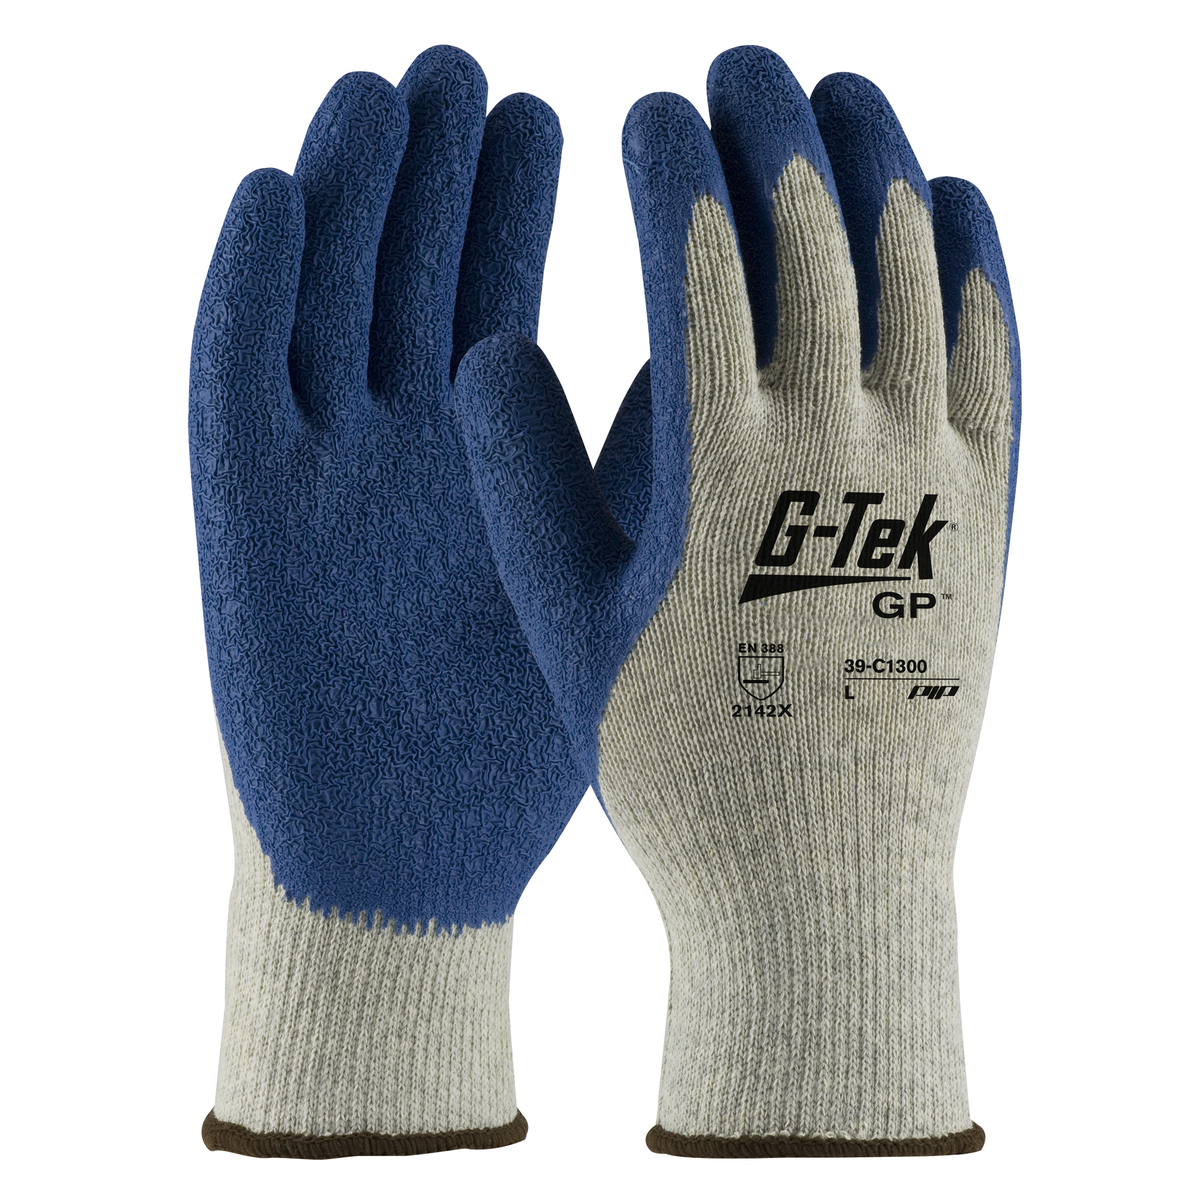 PIP® 2X G-Tek® GP™ 10 Gauge Blue Nitrile Palm And Finger Coated Work Gloves With Cotton And Polyester Liner And Continuous Knit